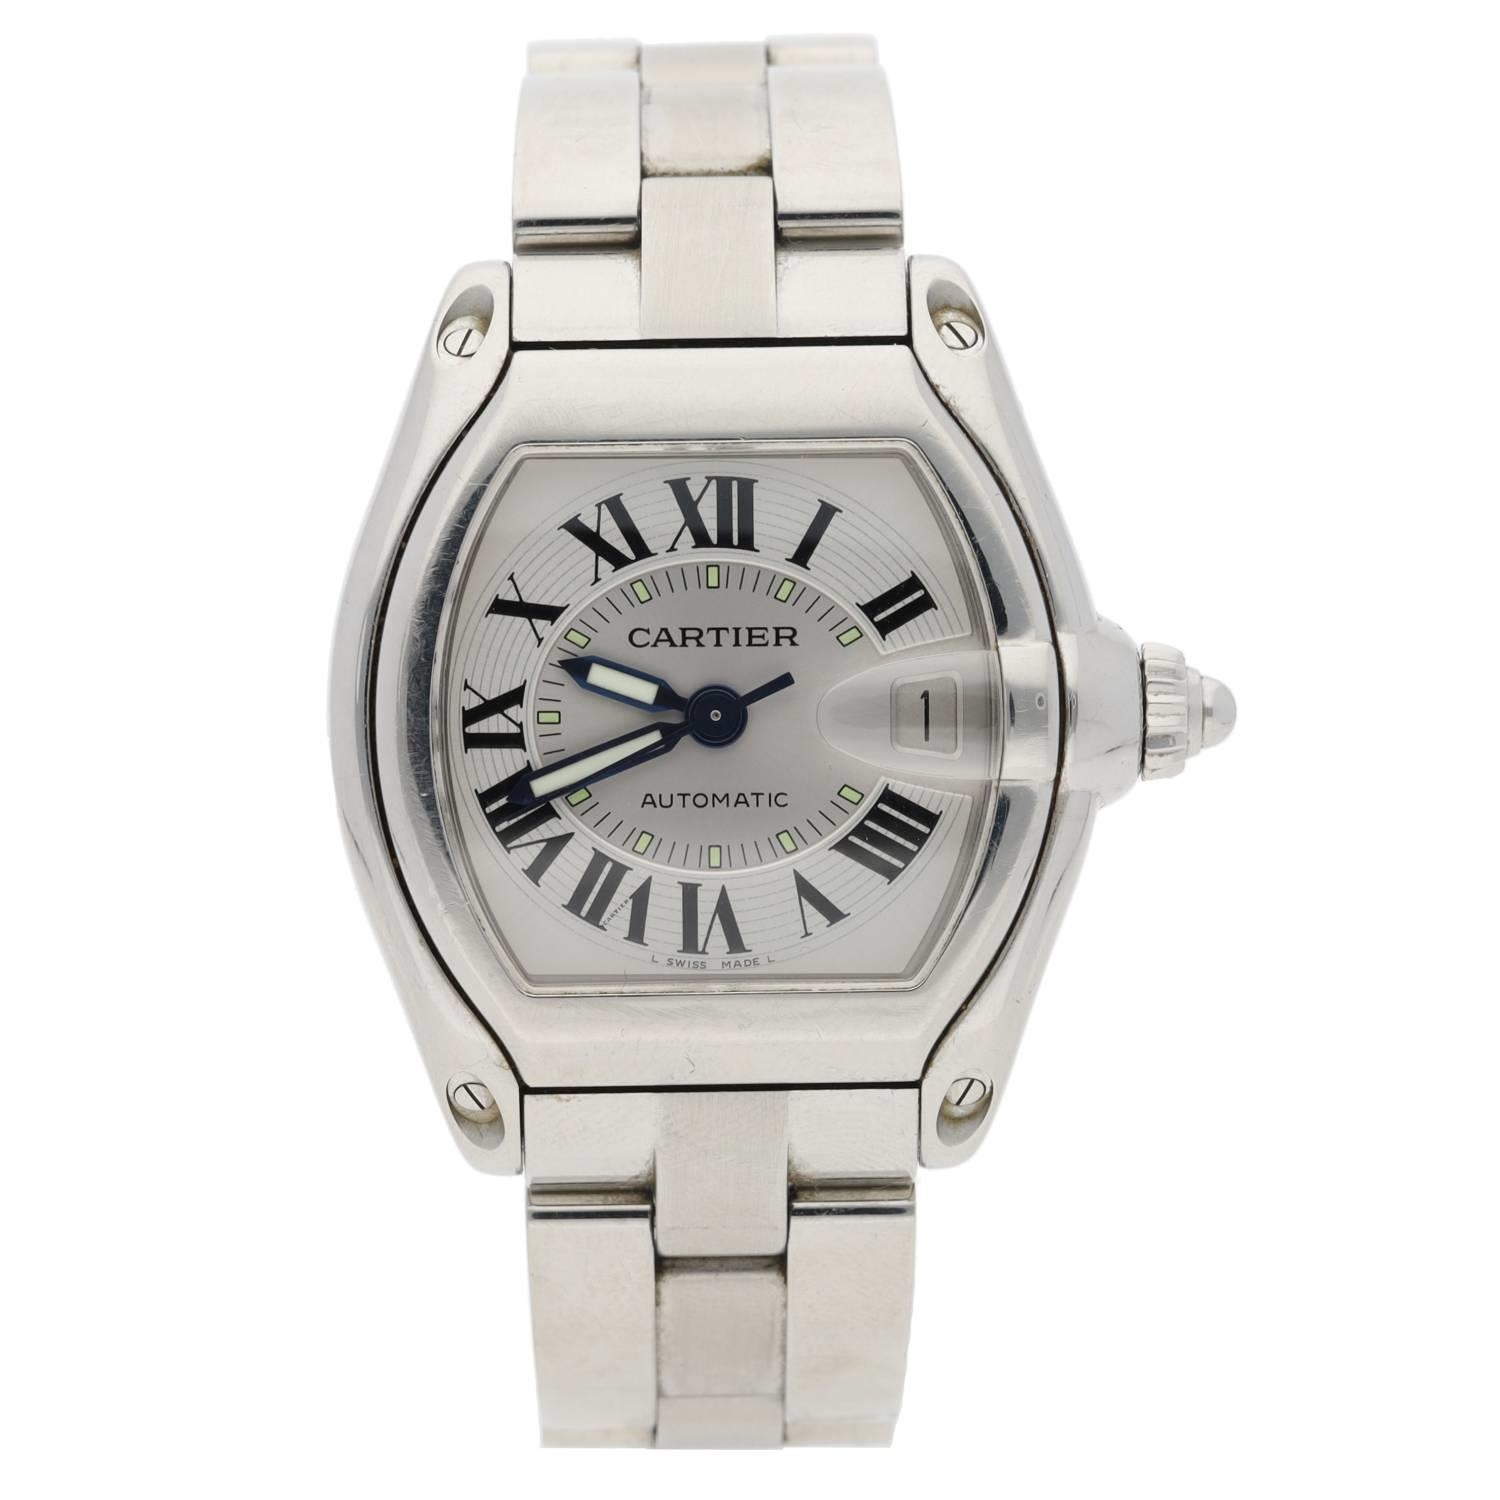 Cartier Roadster automatic gentleman's stainless steel wristwatch, reference no. 2510, serial number